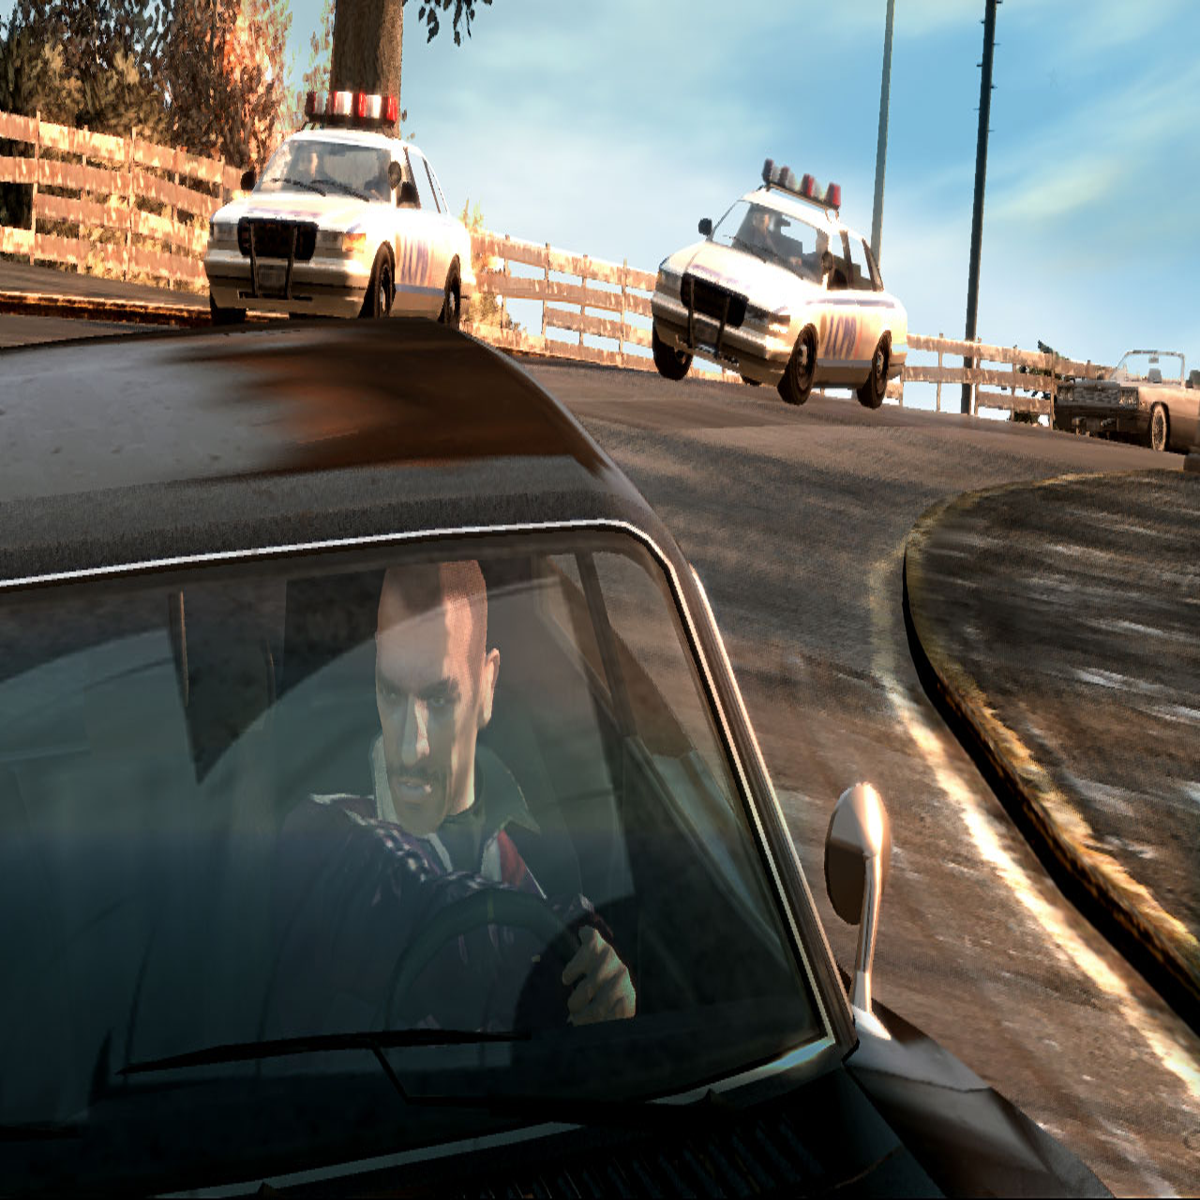 Play grand theft auto 5 on Xbox 360? - RGV System Modders